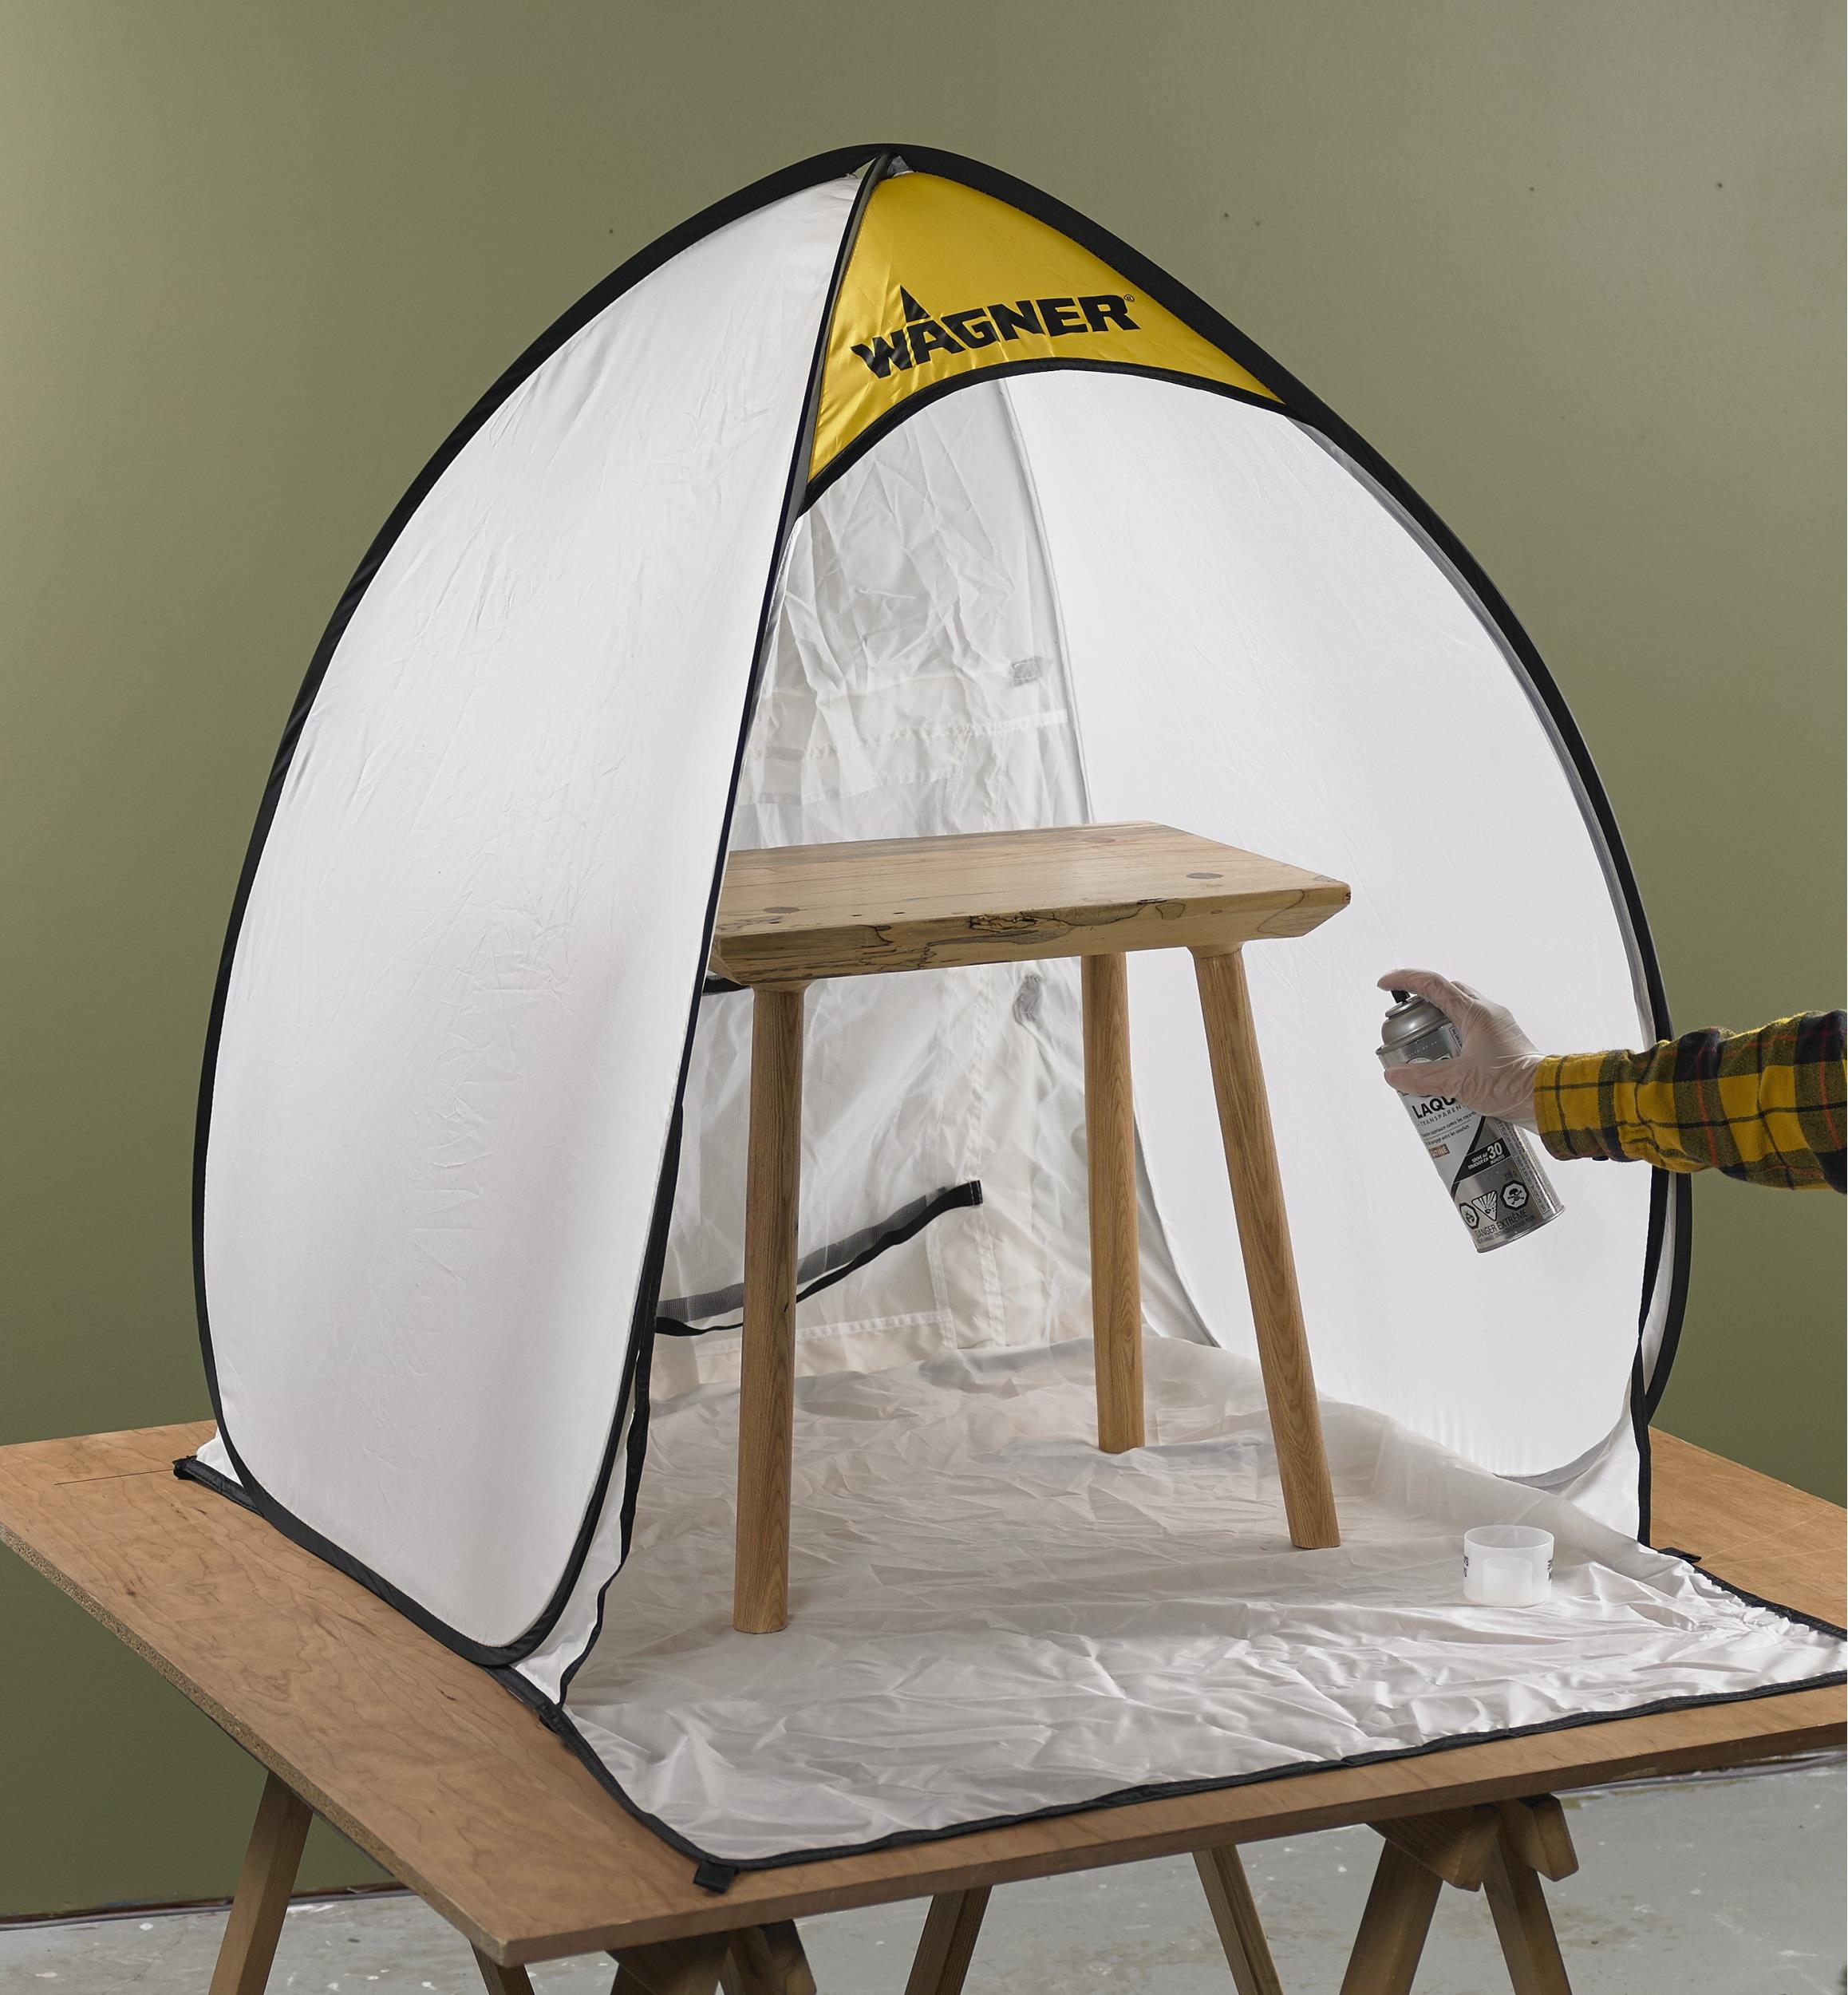 Spray Paint Tent by Wagner 30 in x 35 in x 39 i